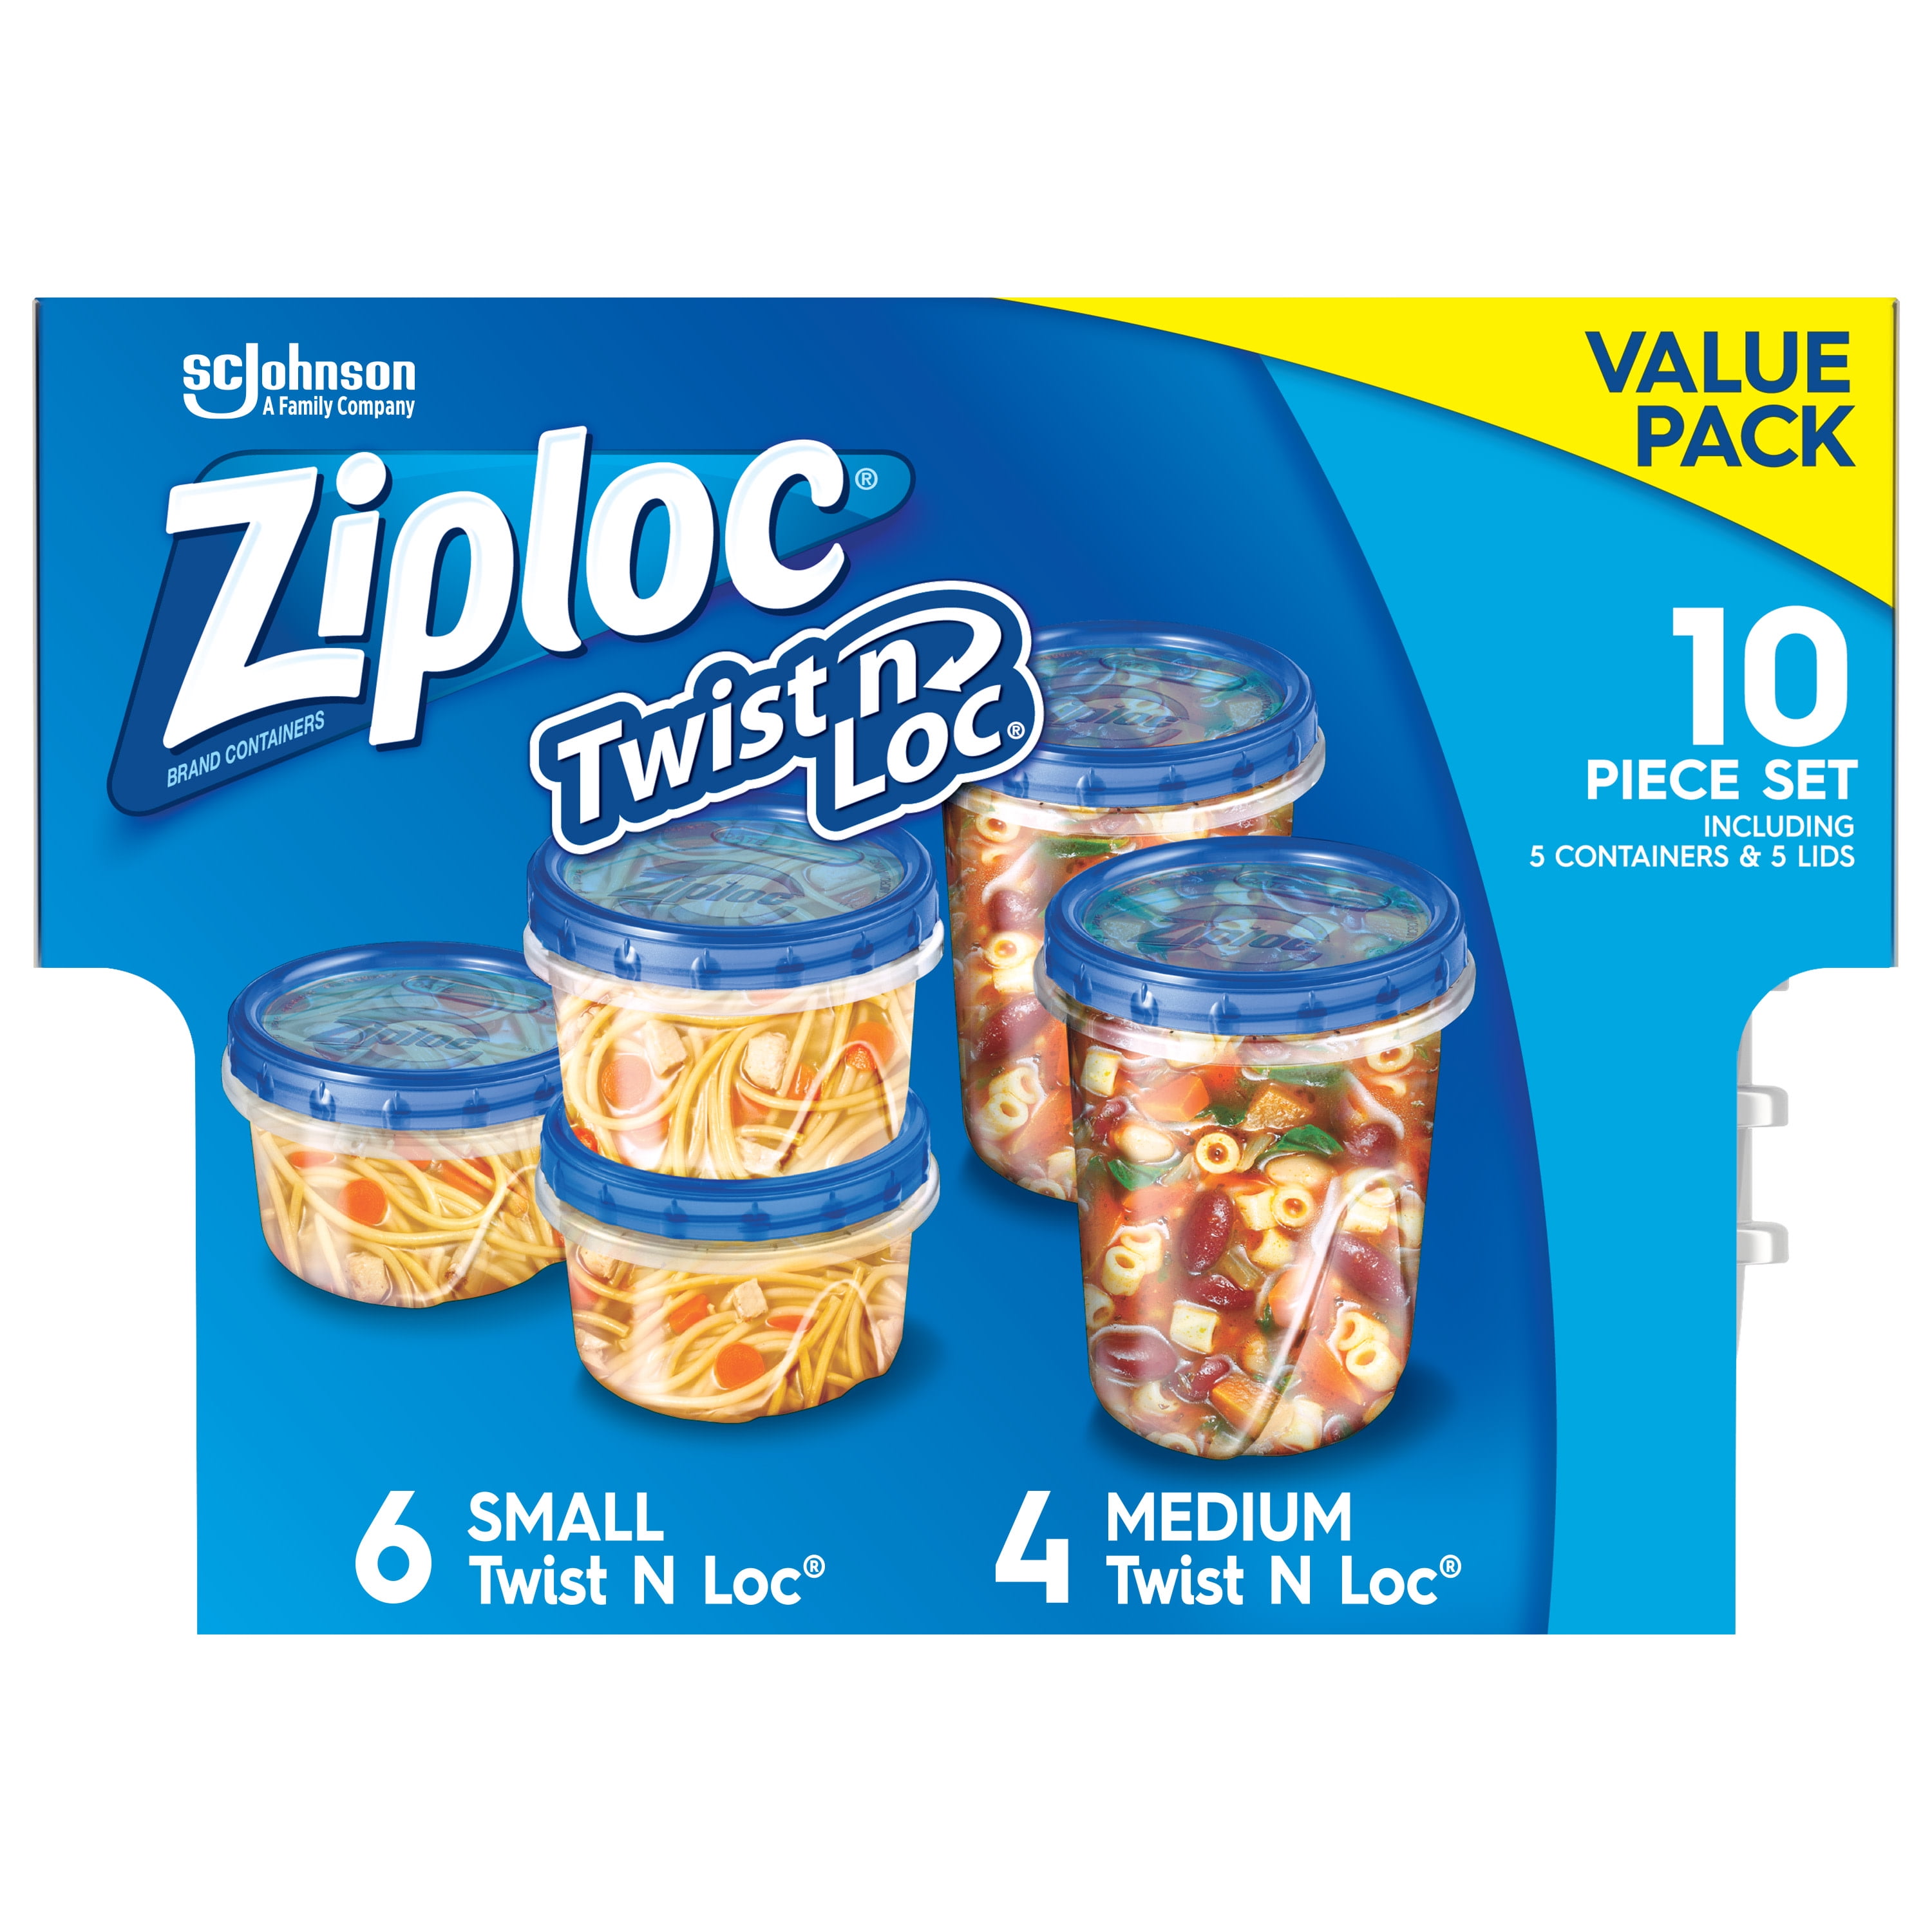 Ziploc Storage Containers Assorted Pack 58 Piece Set Includes Twist n Loc and One Press Seal Containers 